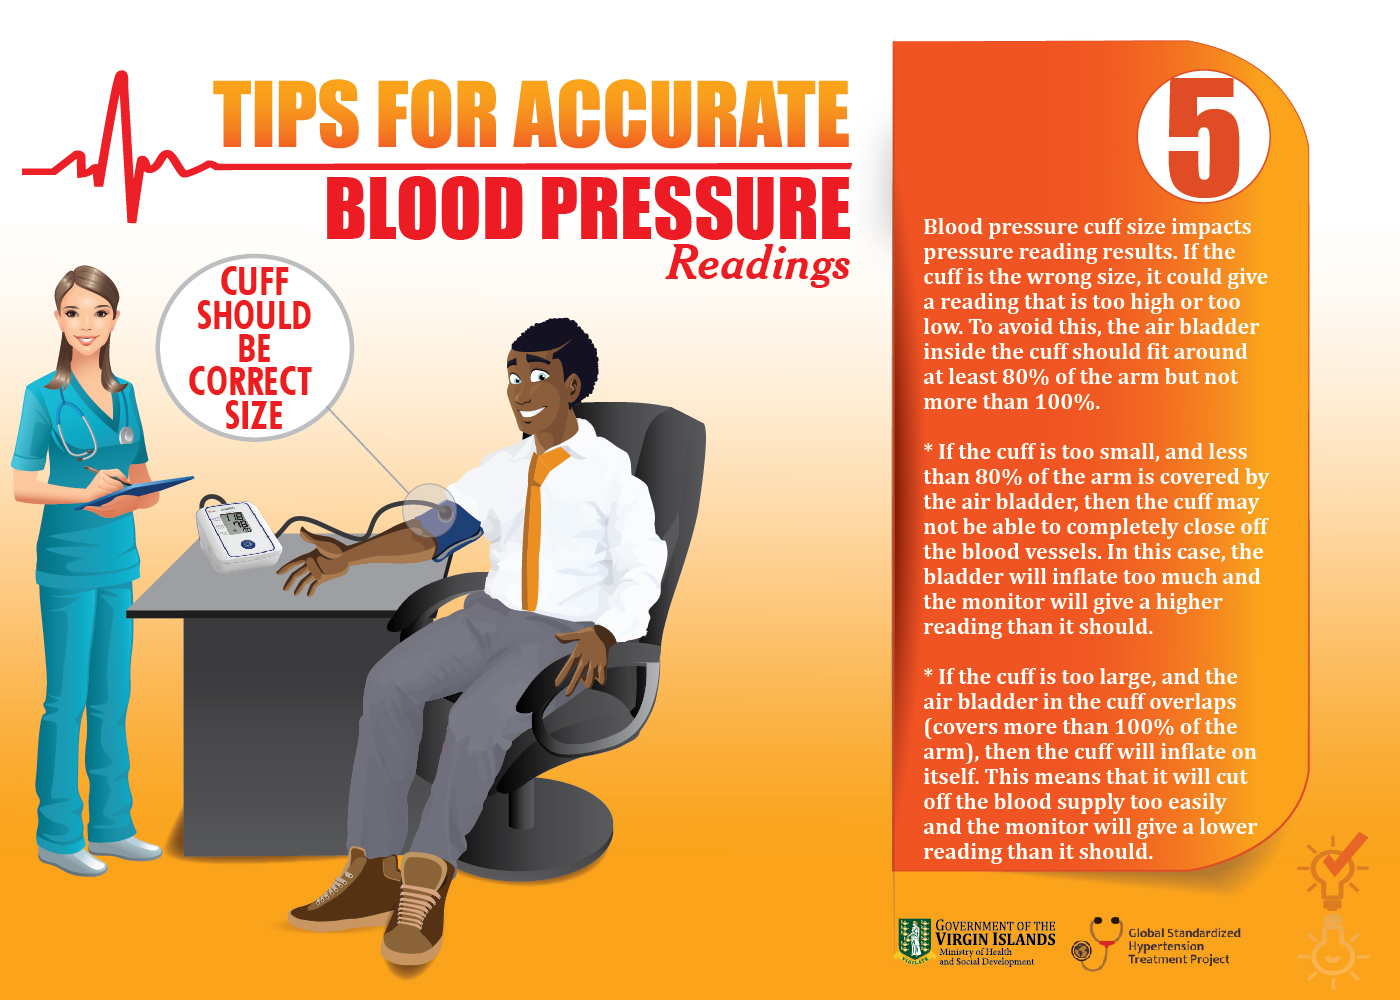 Tip 5 How To Check Your Blood Pressure The Right Way